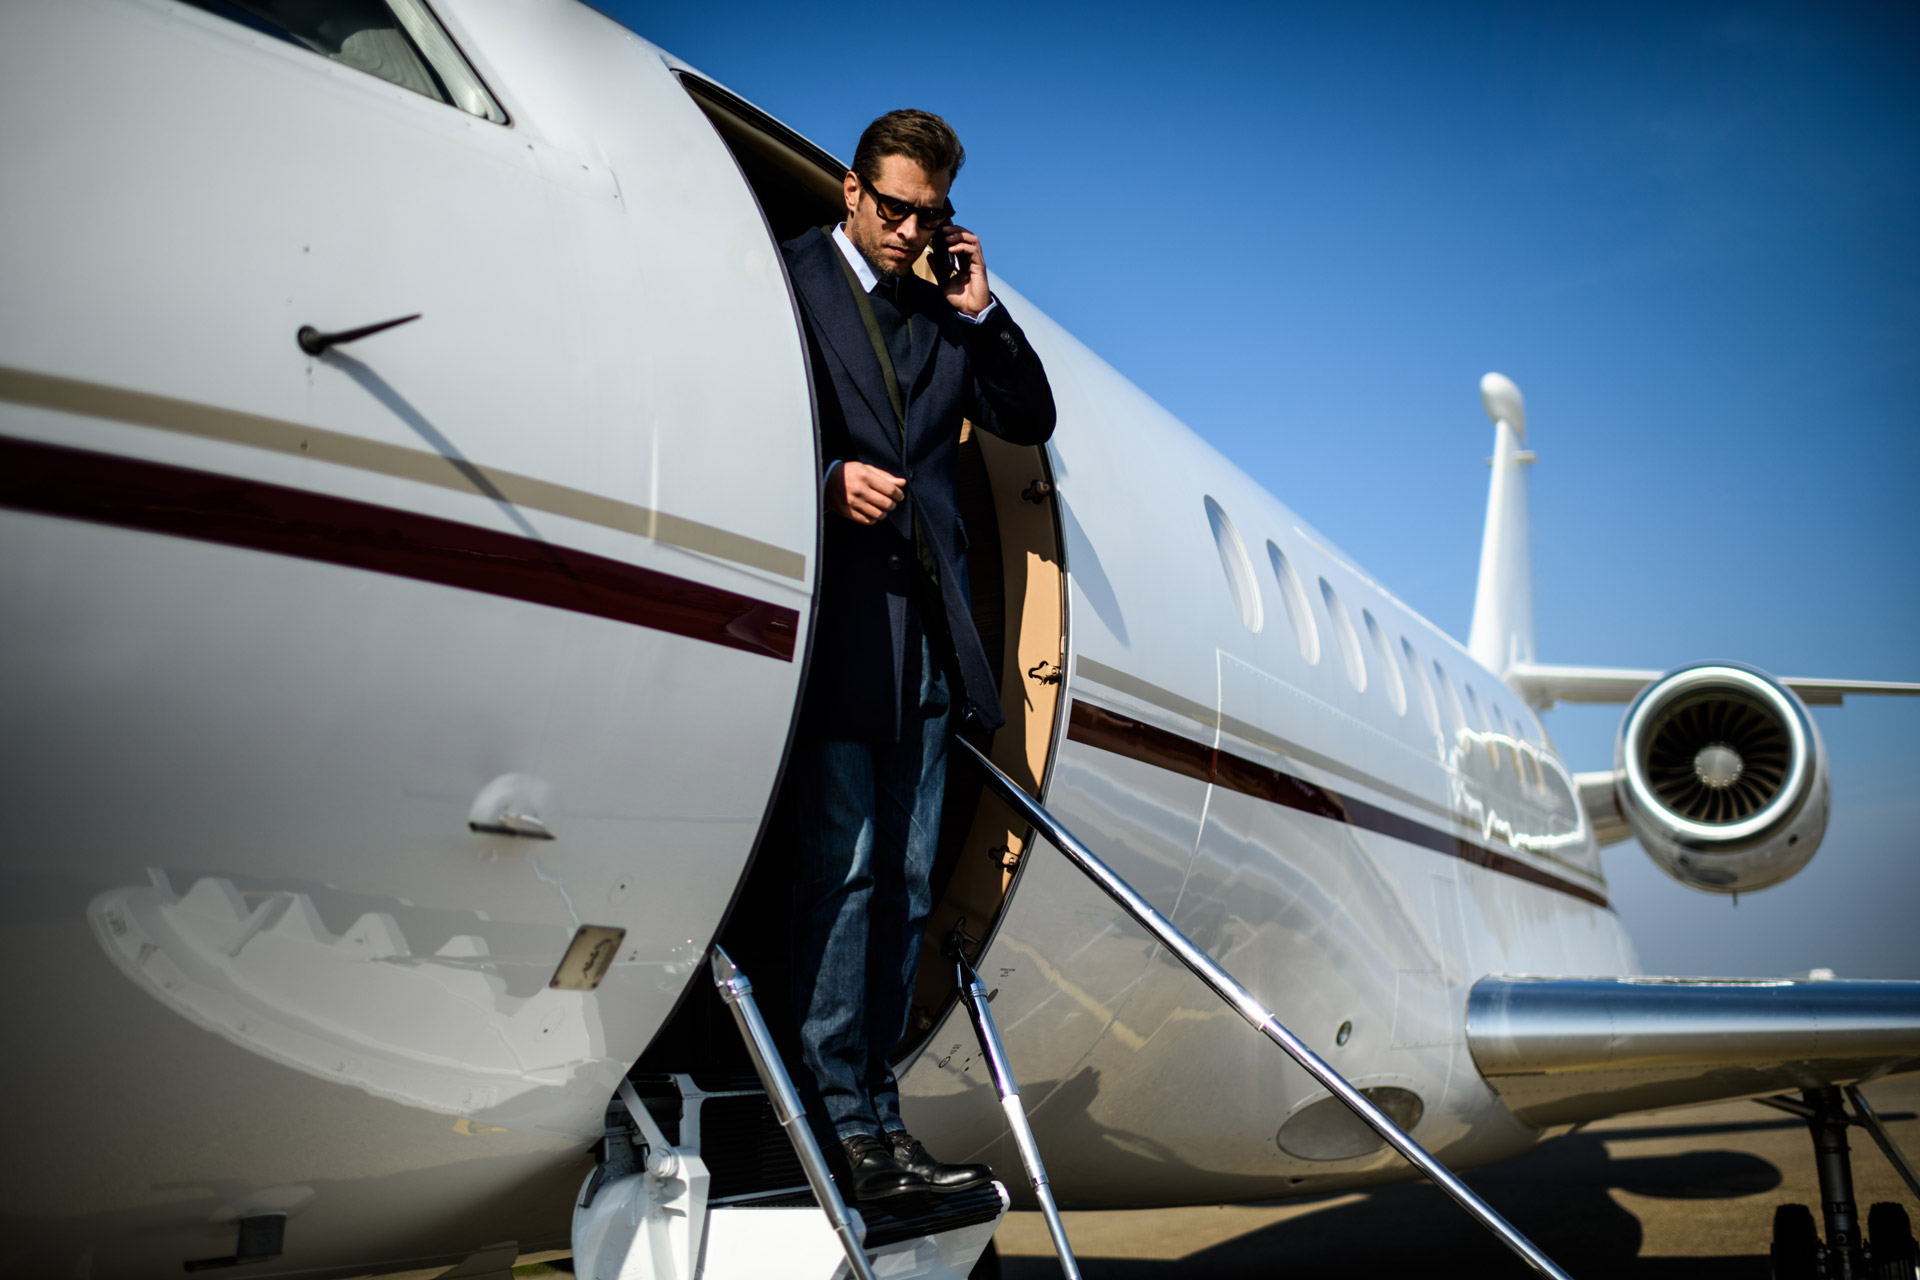 On-Location Travel Made Easy: Charter A Private Jet